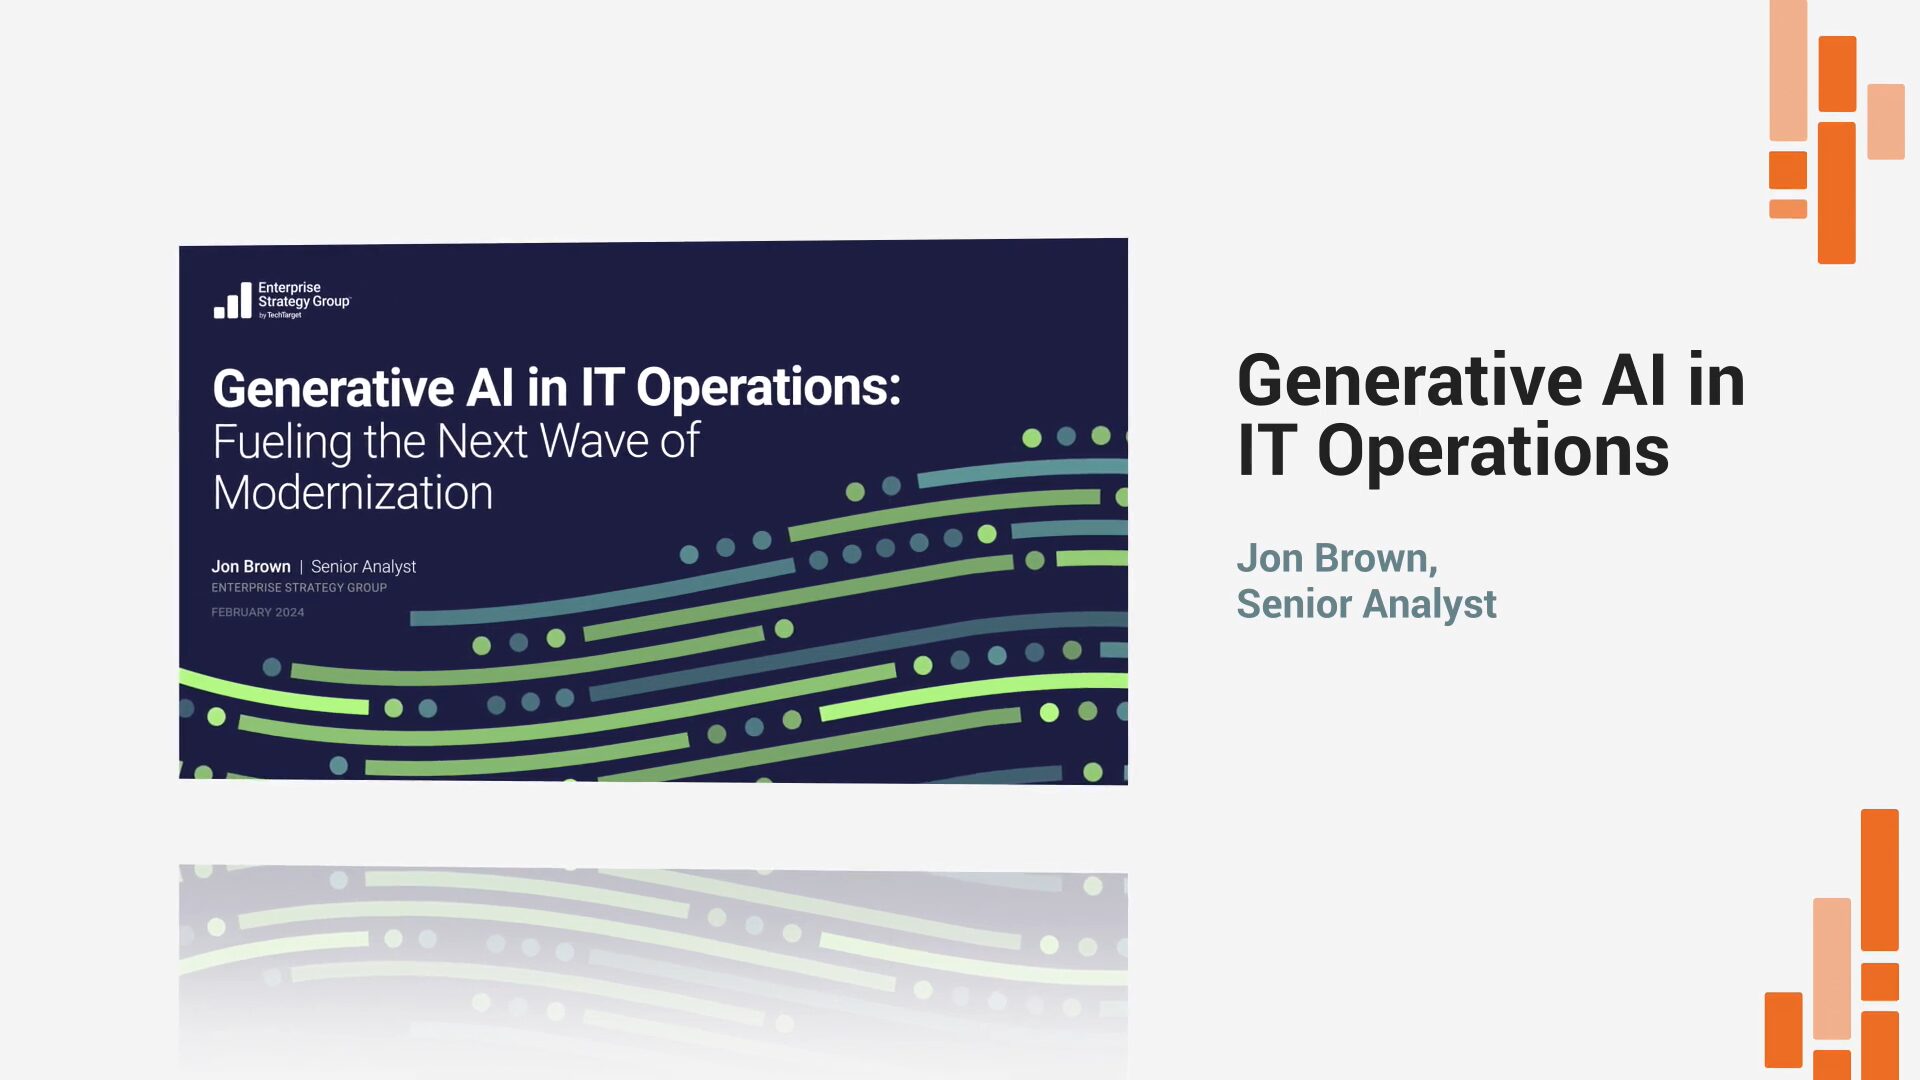 The Impact of GenAI in IT Operations